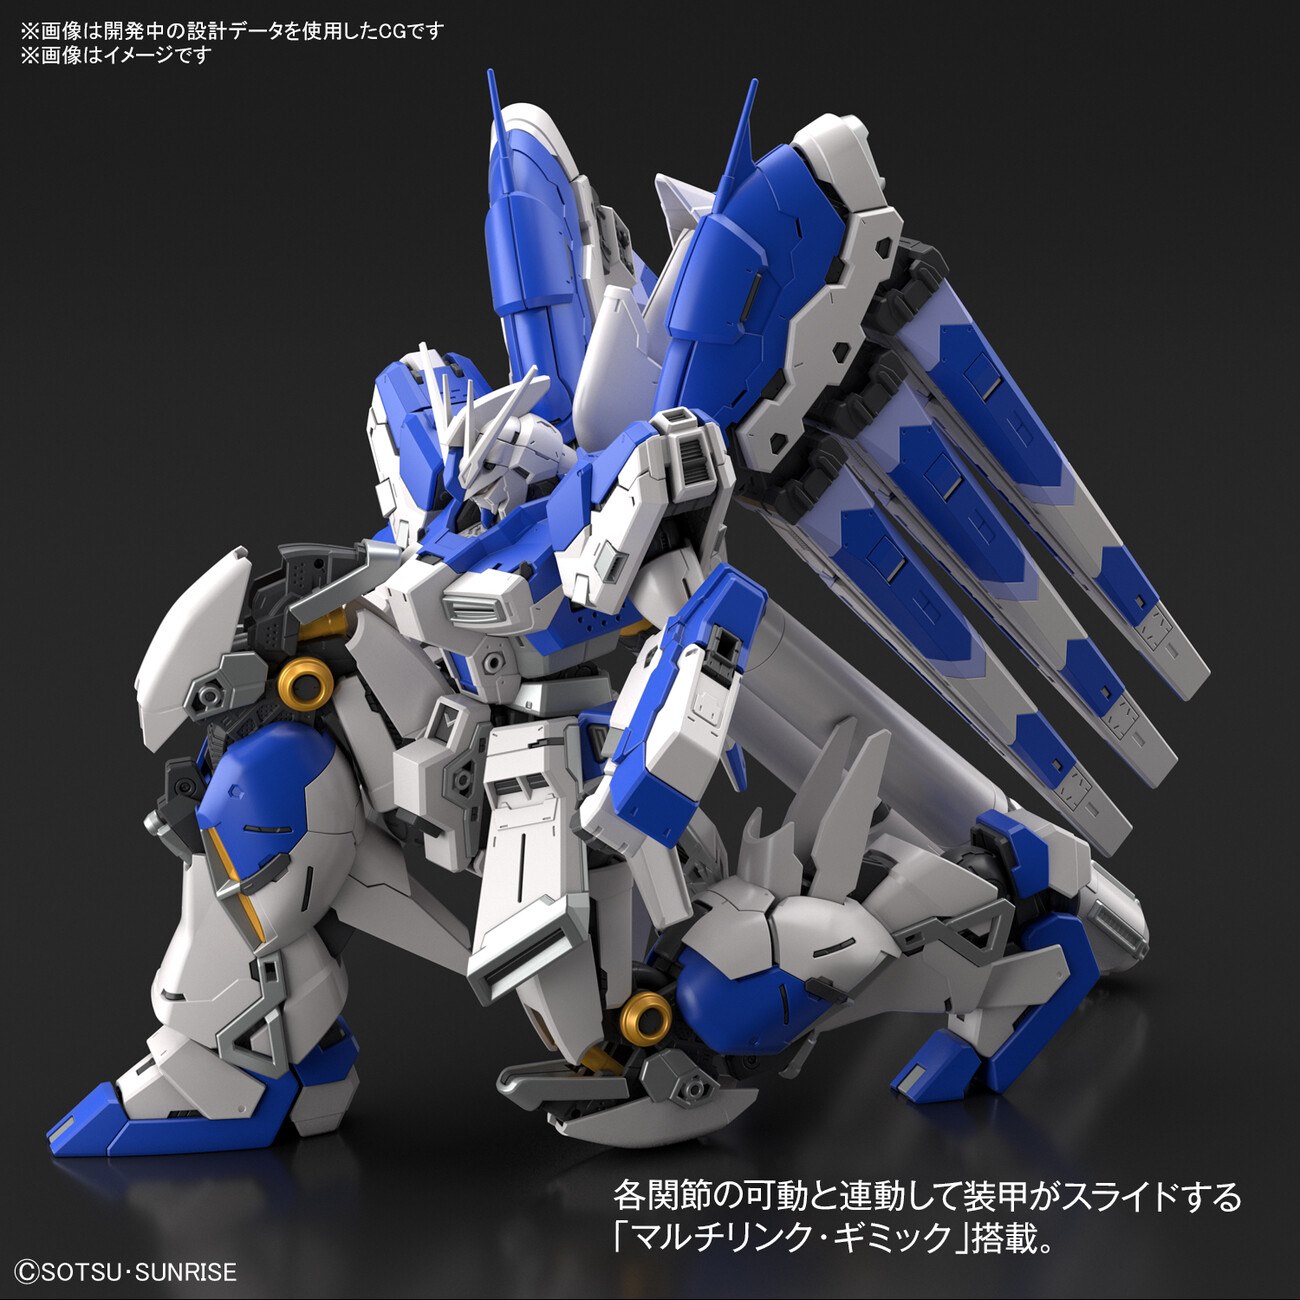 RG 1/144 hi-nu Gundam - Release Info, Box art and Official Images